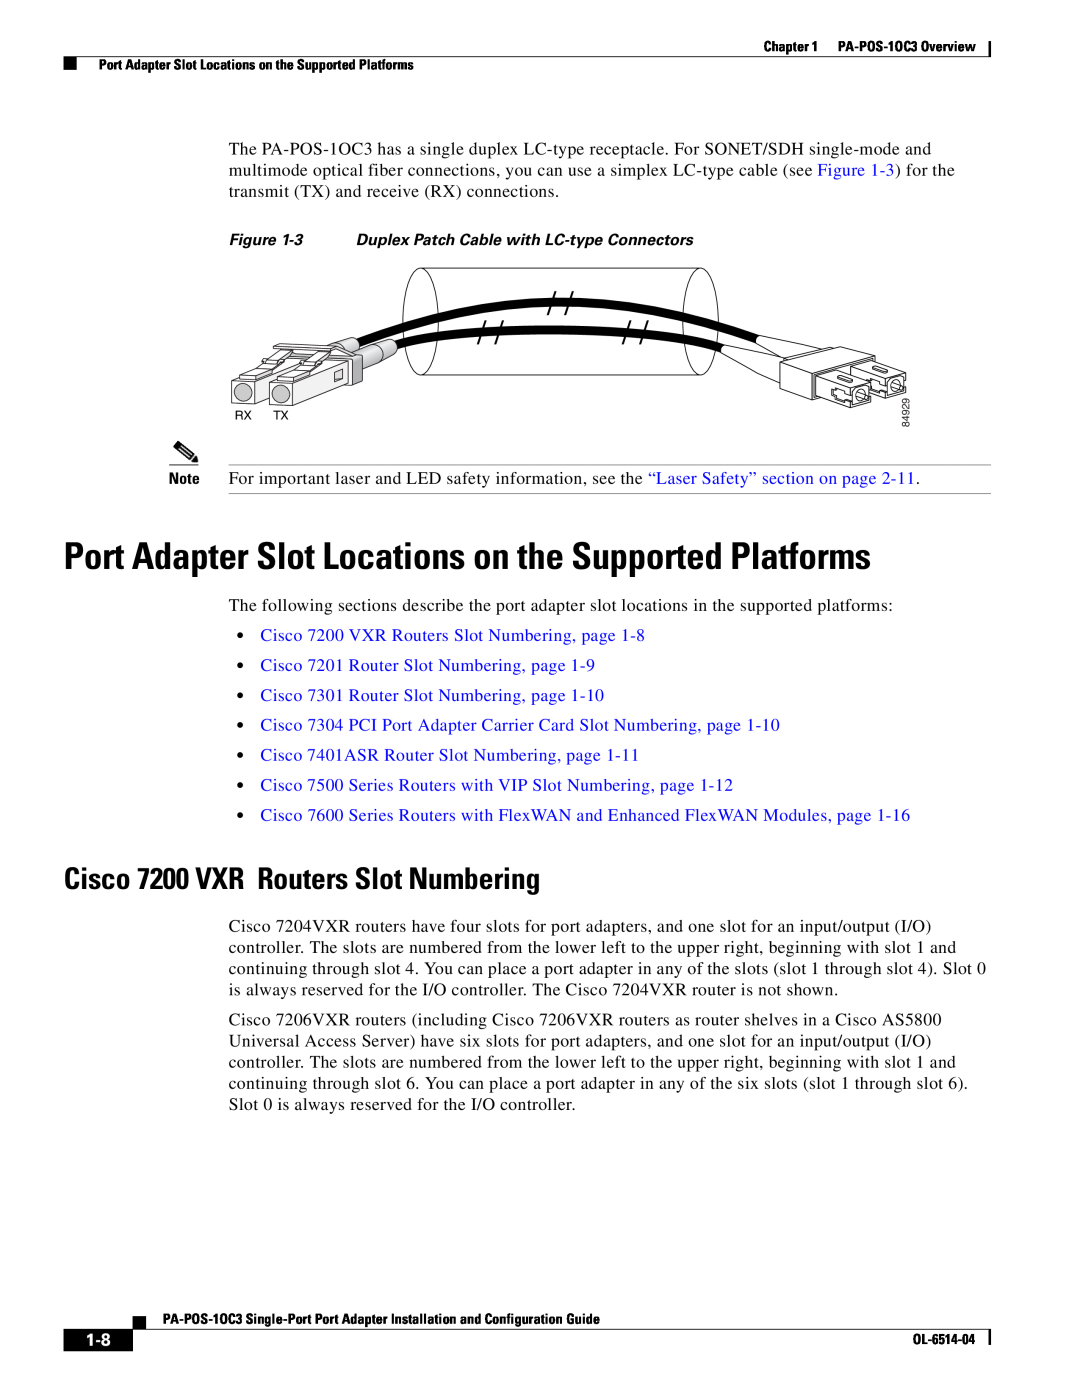 Cisco Systems PA-POS-2OC3 Port Adapter Slot Locations on the Supported Platforms, Cisco 7200 VXR Routers Slot Numbering 